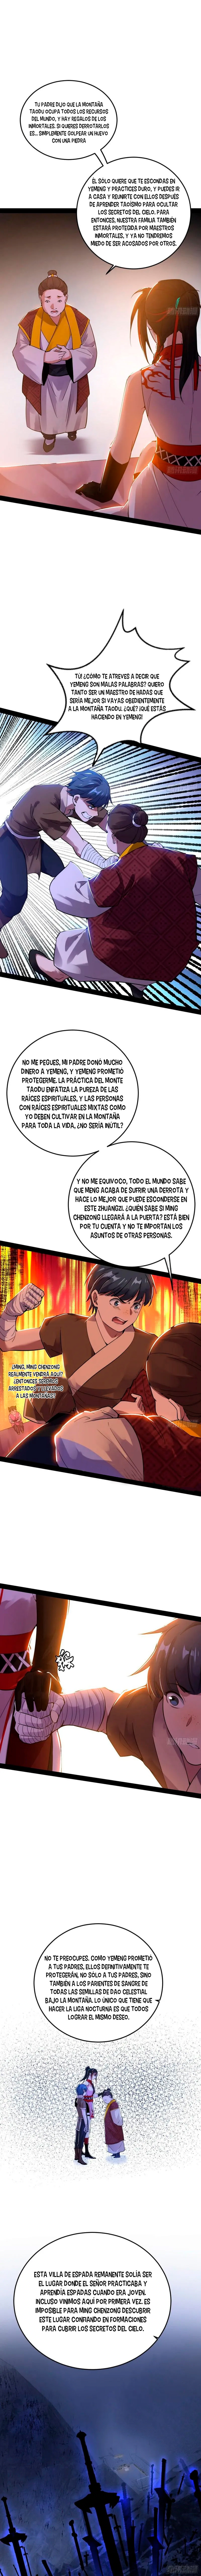 Manga Soy un dios maligno Chapter 321 image number 13